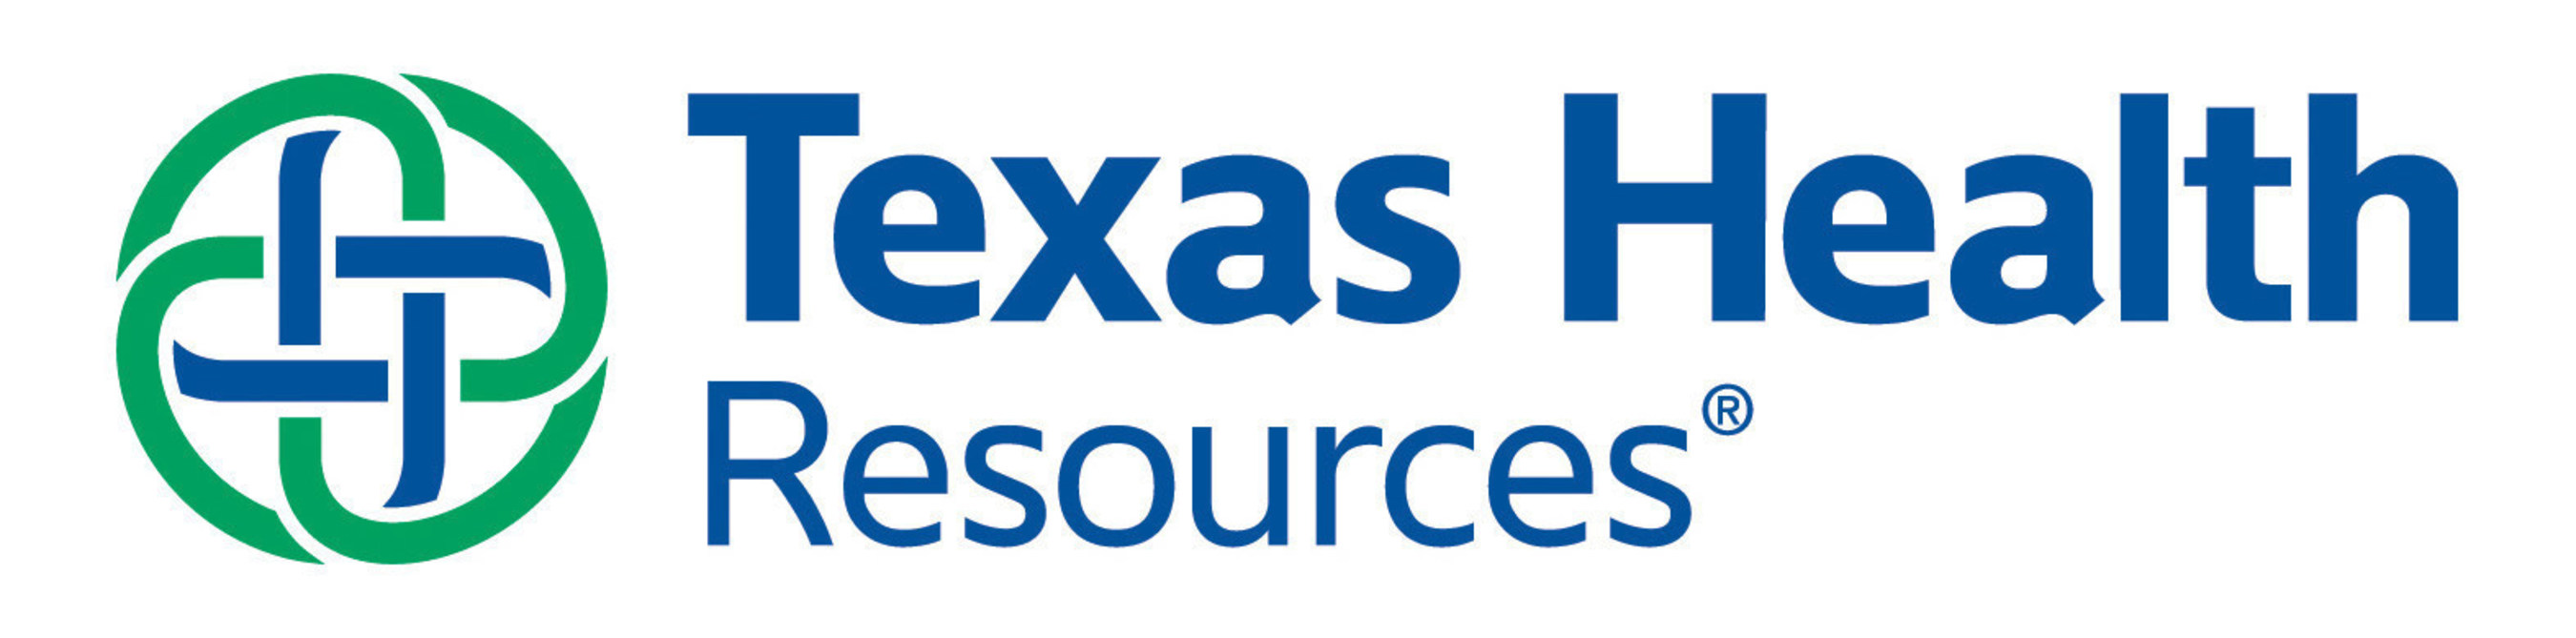 Texas Health Resources and Adeptus Health Join Forces to Enhance Access